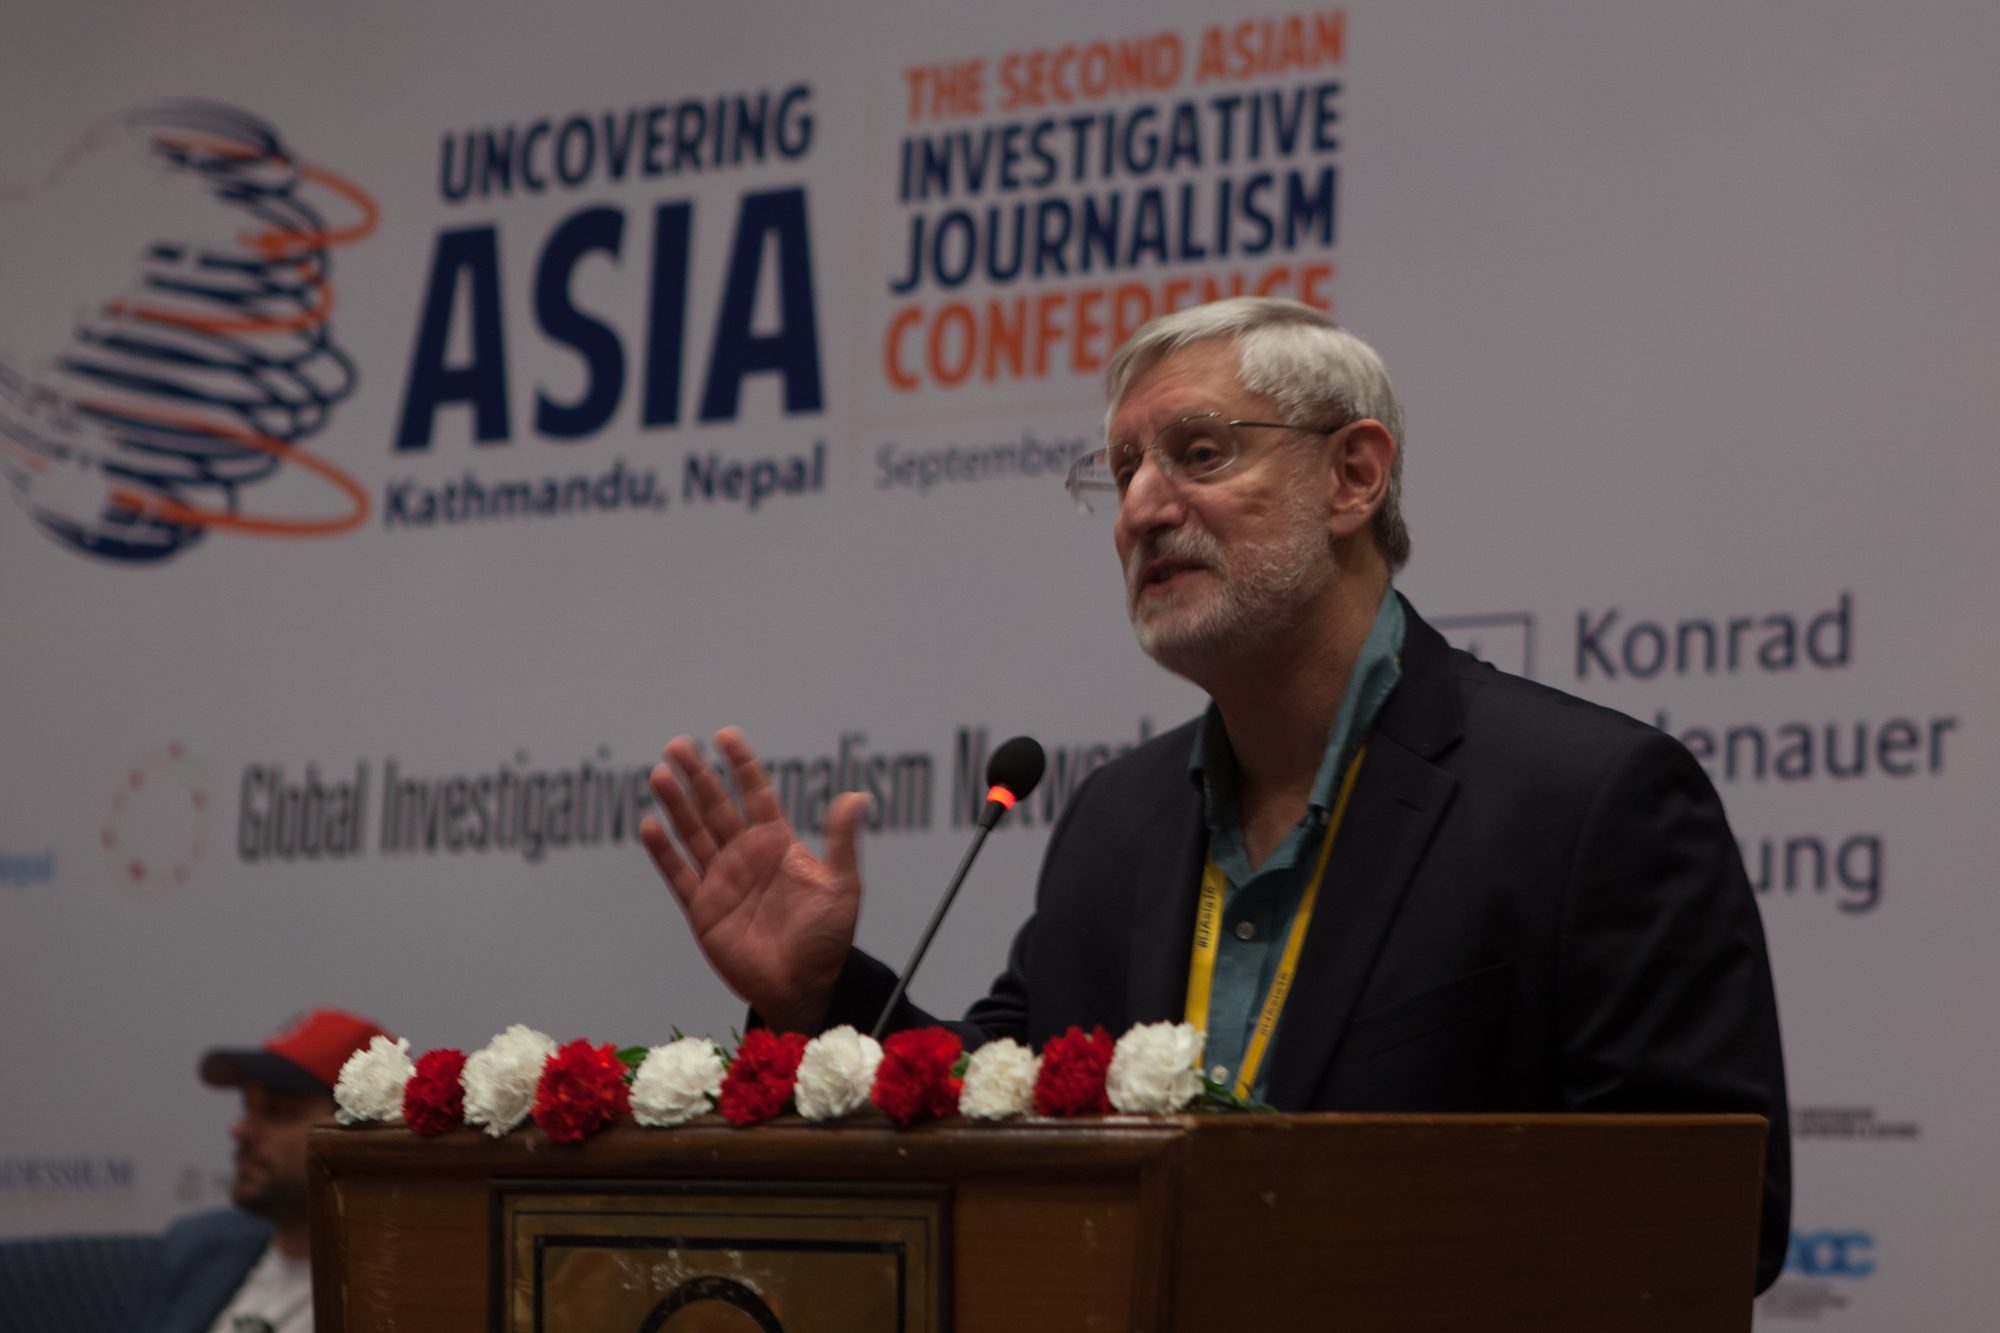 UNCOVERING ASIA. David Kaplan, head of the Global Investigative Journalism Network, at the opening session of Uncovering Asia: The 2nd Asian Investigative Journalism Conference in Kathmandu, Nepal. Photo by Rappler 